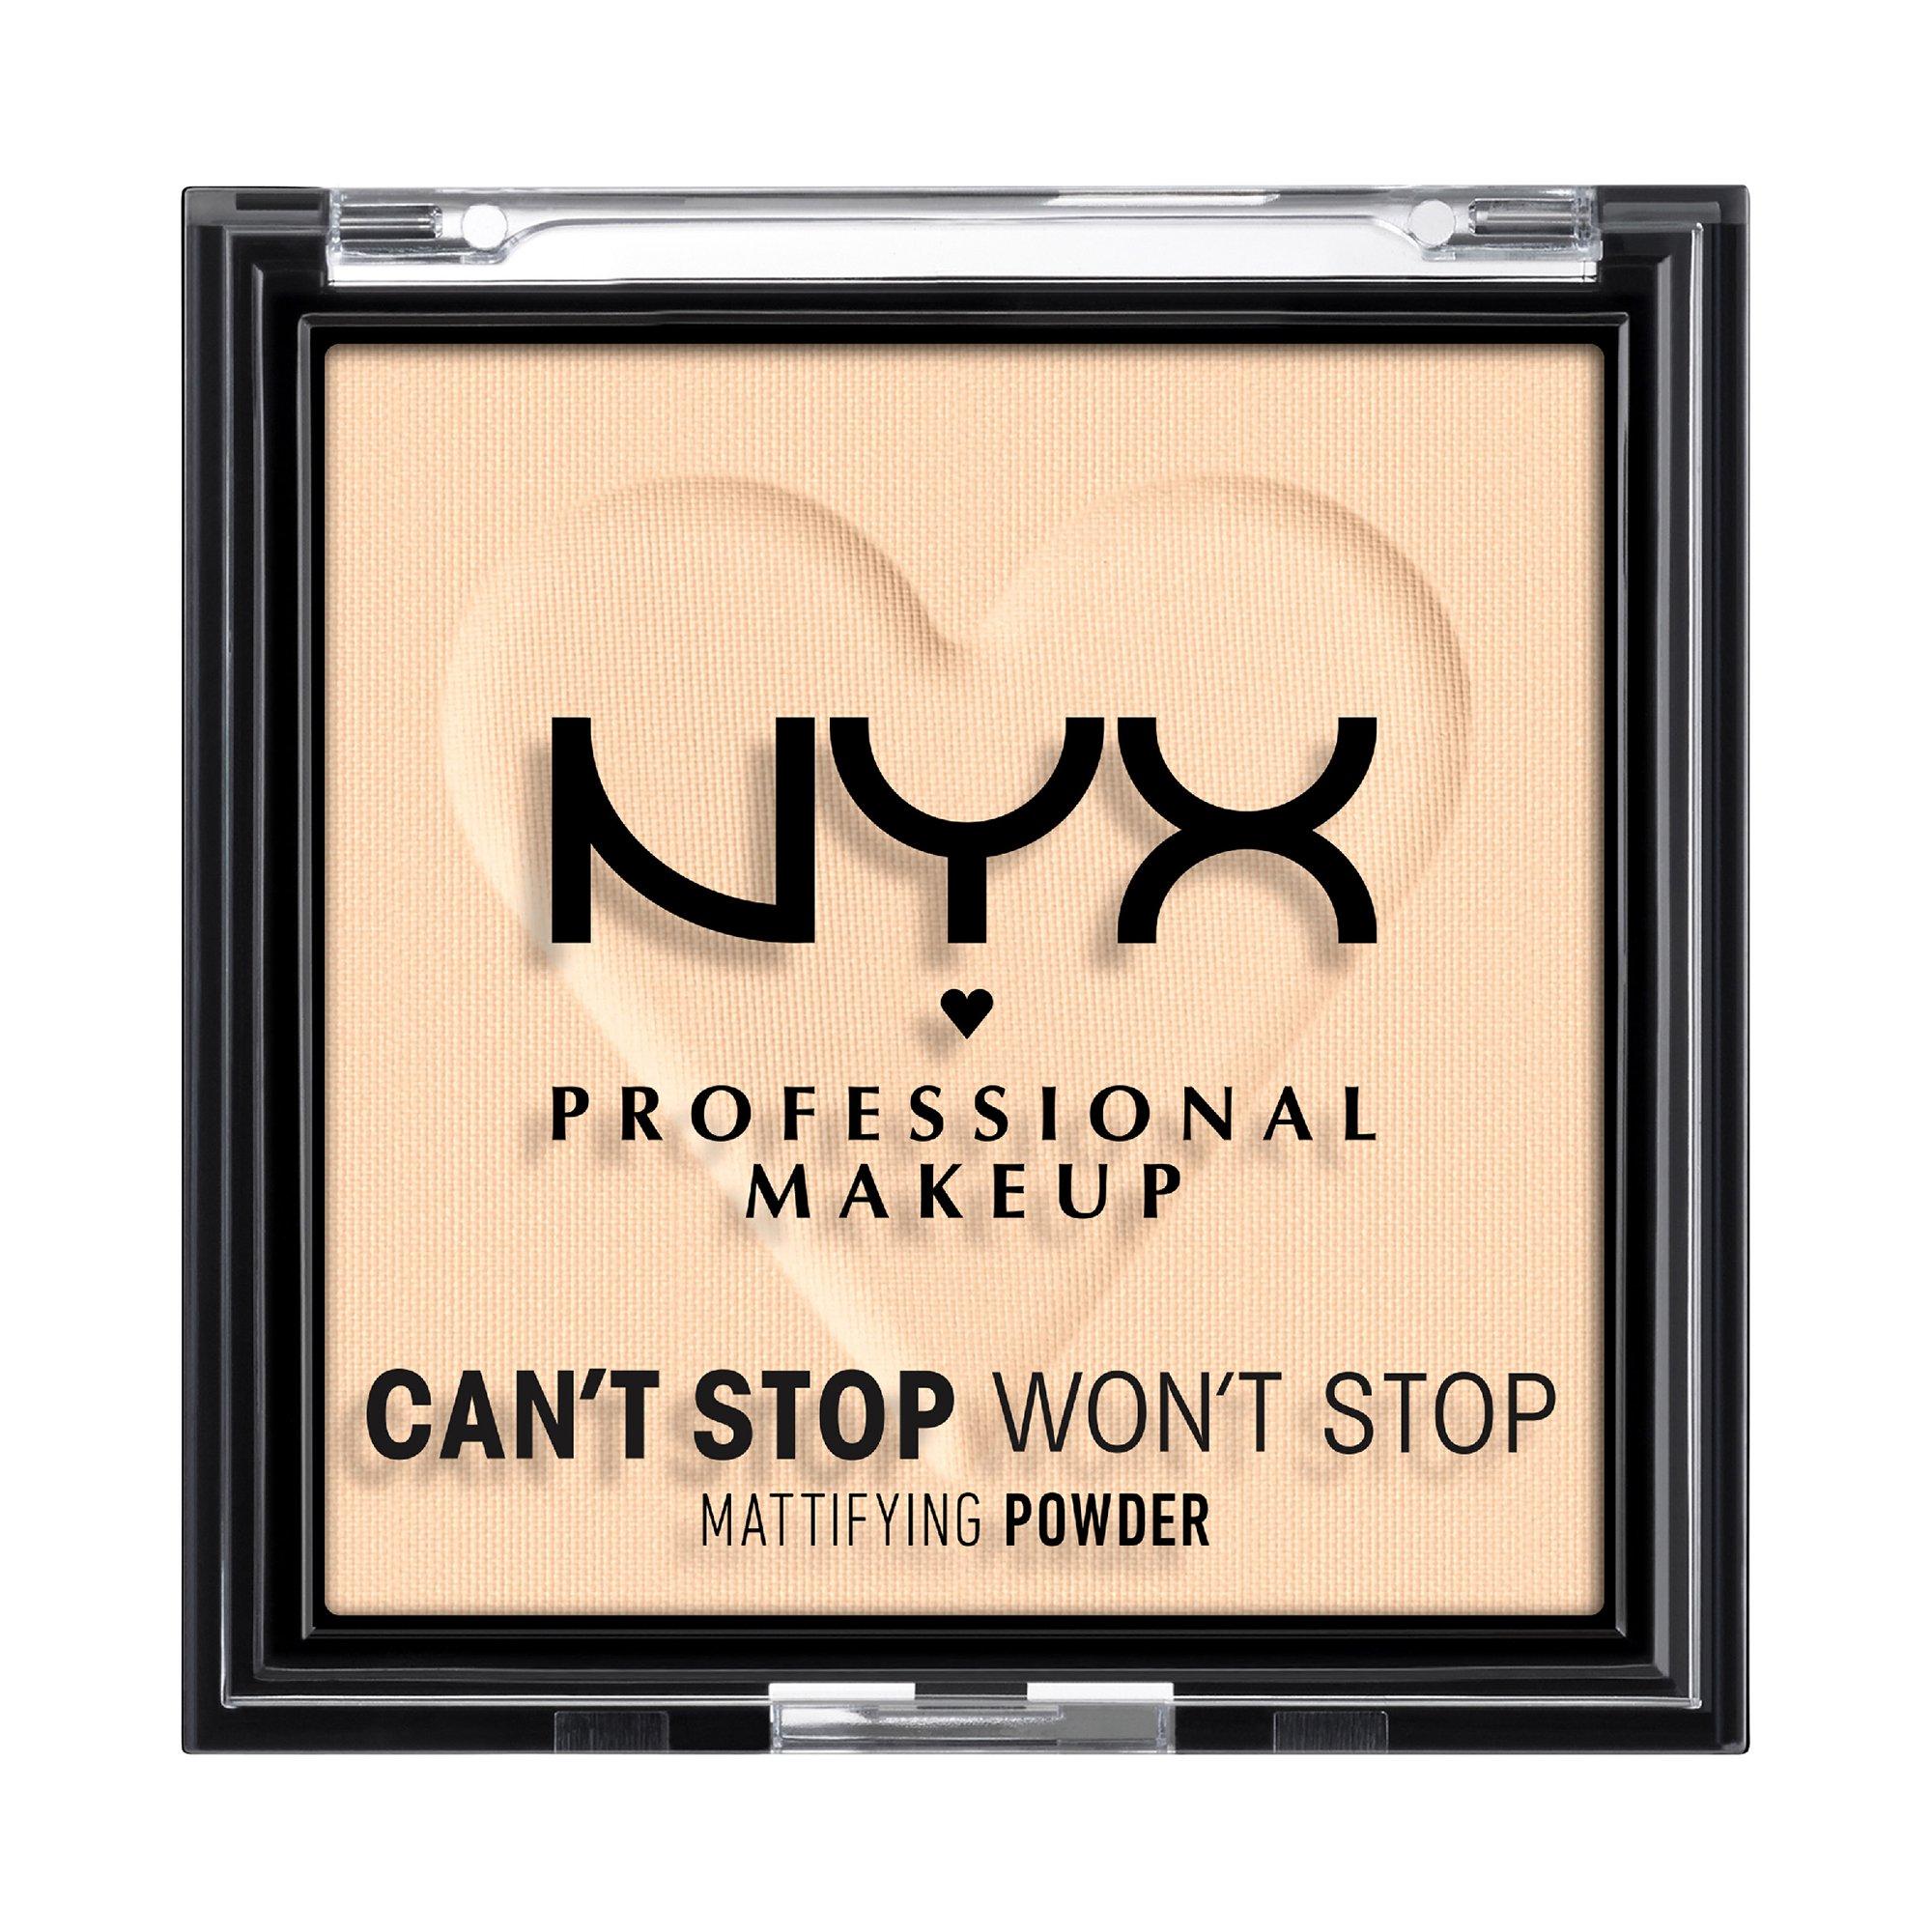 Image of NYX-PROFESSIONAL-MAKEUP Can't Stop Won't Stop Can?t Stop Won?t Stop Mattifying Powder - 6g